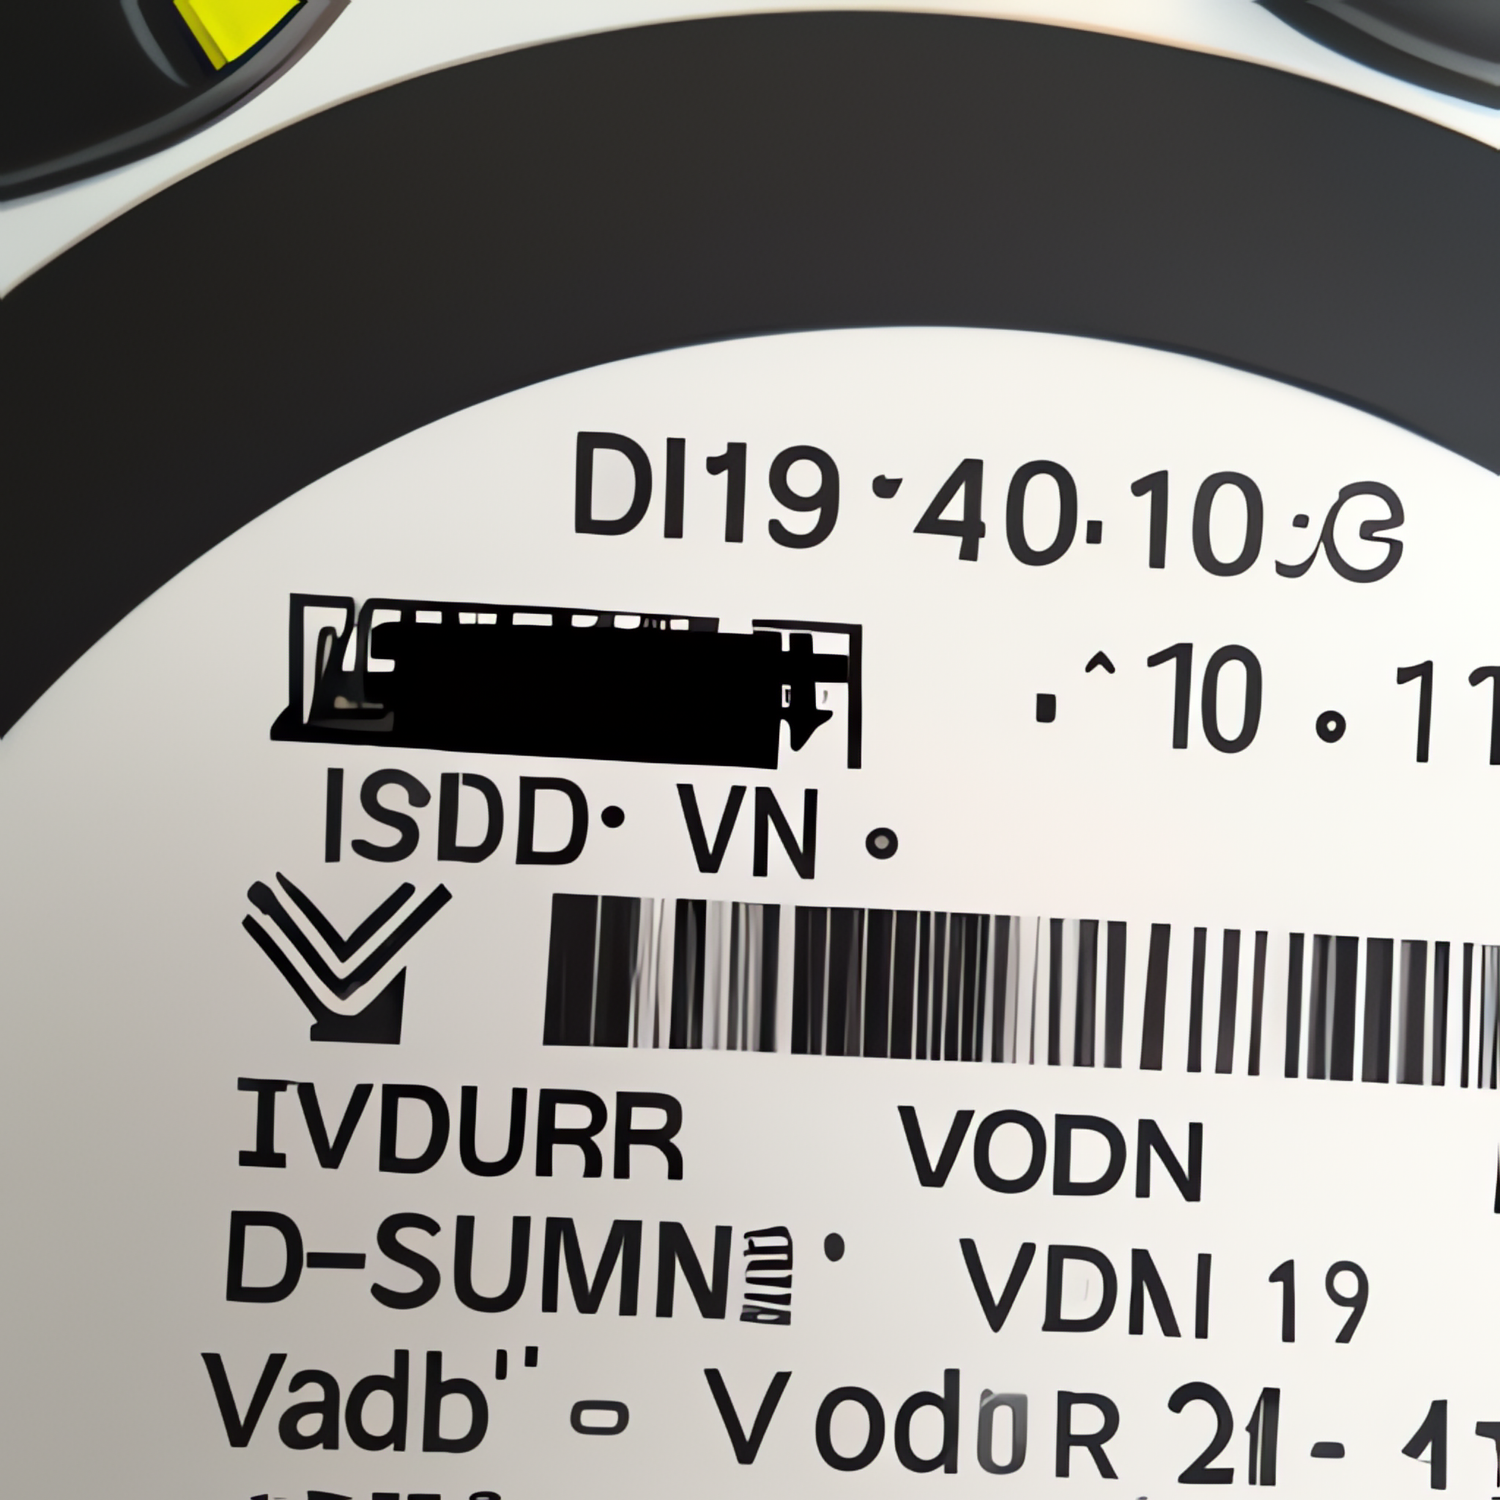 How do I find my VirtualDJ serial number?